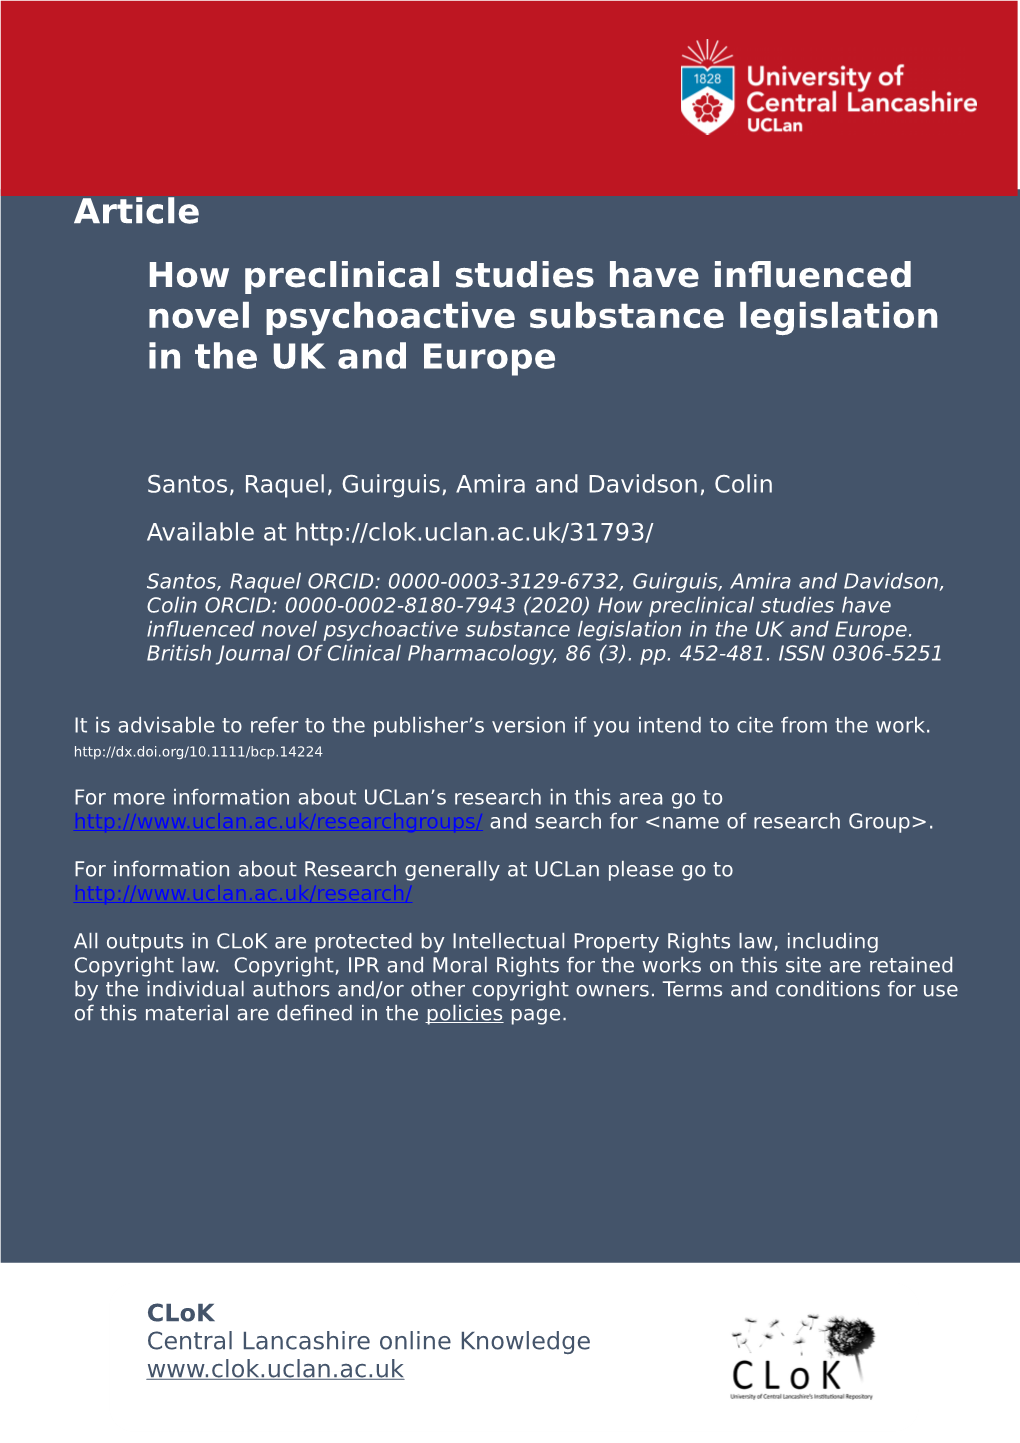 How Pre-Clinical Studies Have Influenced Novel Psychoactive Substance Legislation in the UK and Europe